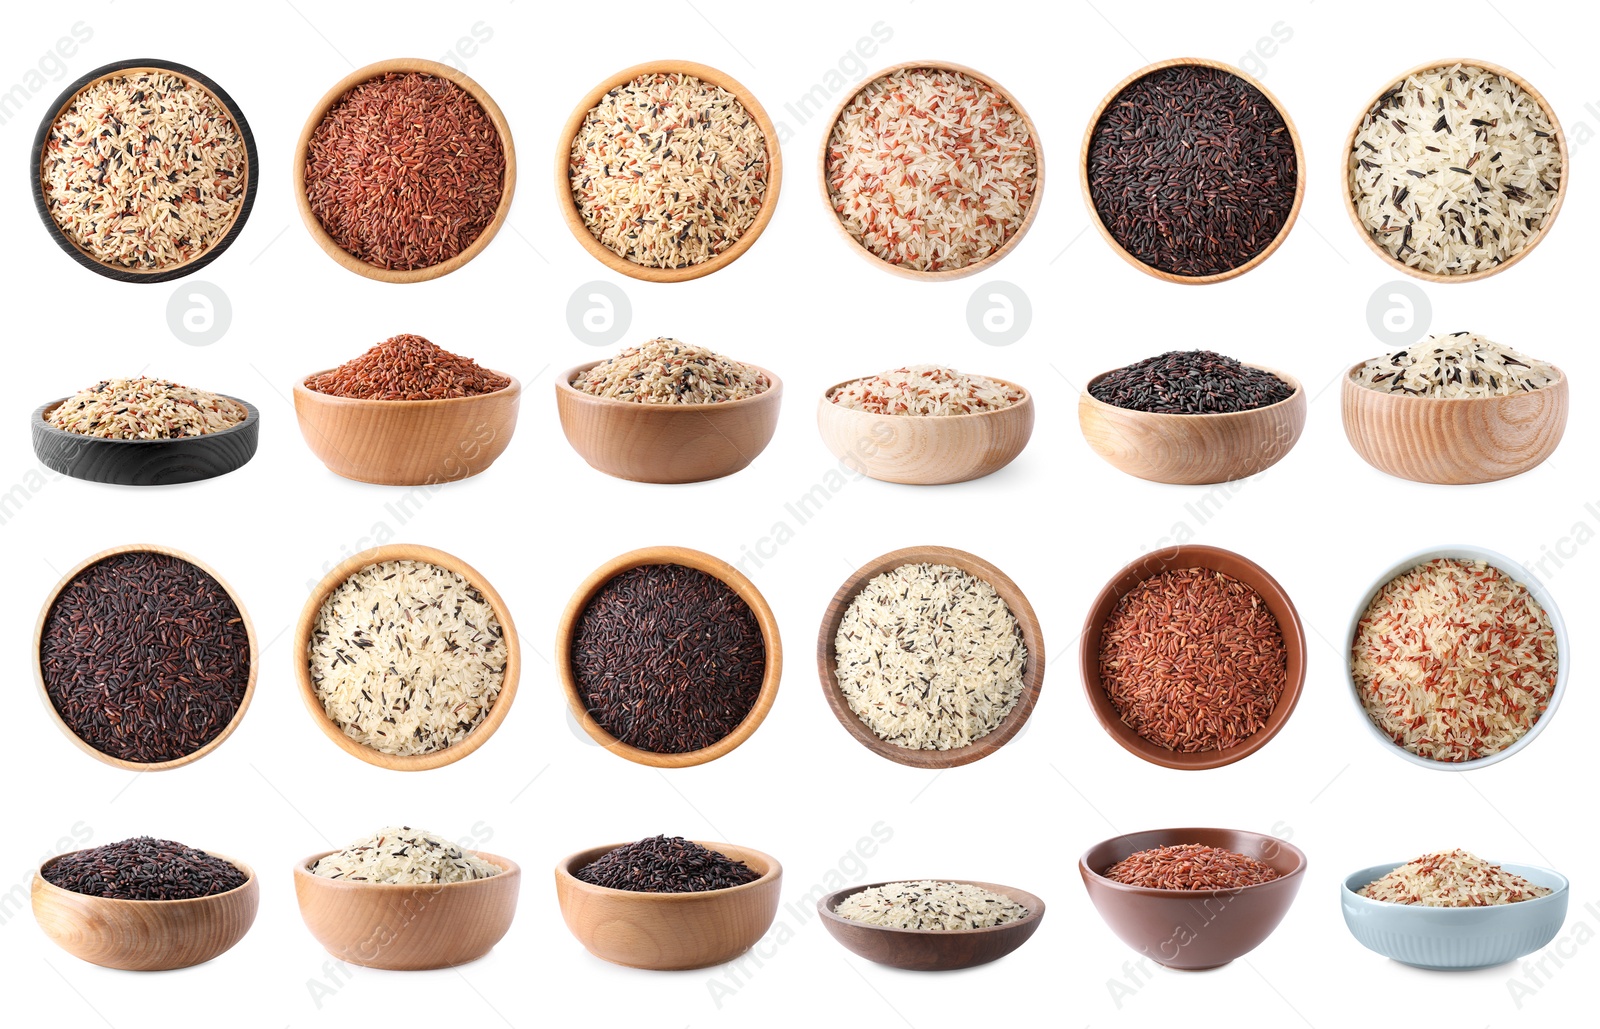 Image of Set with different types of rice in bowls on white background